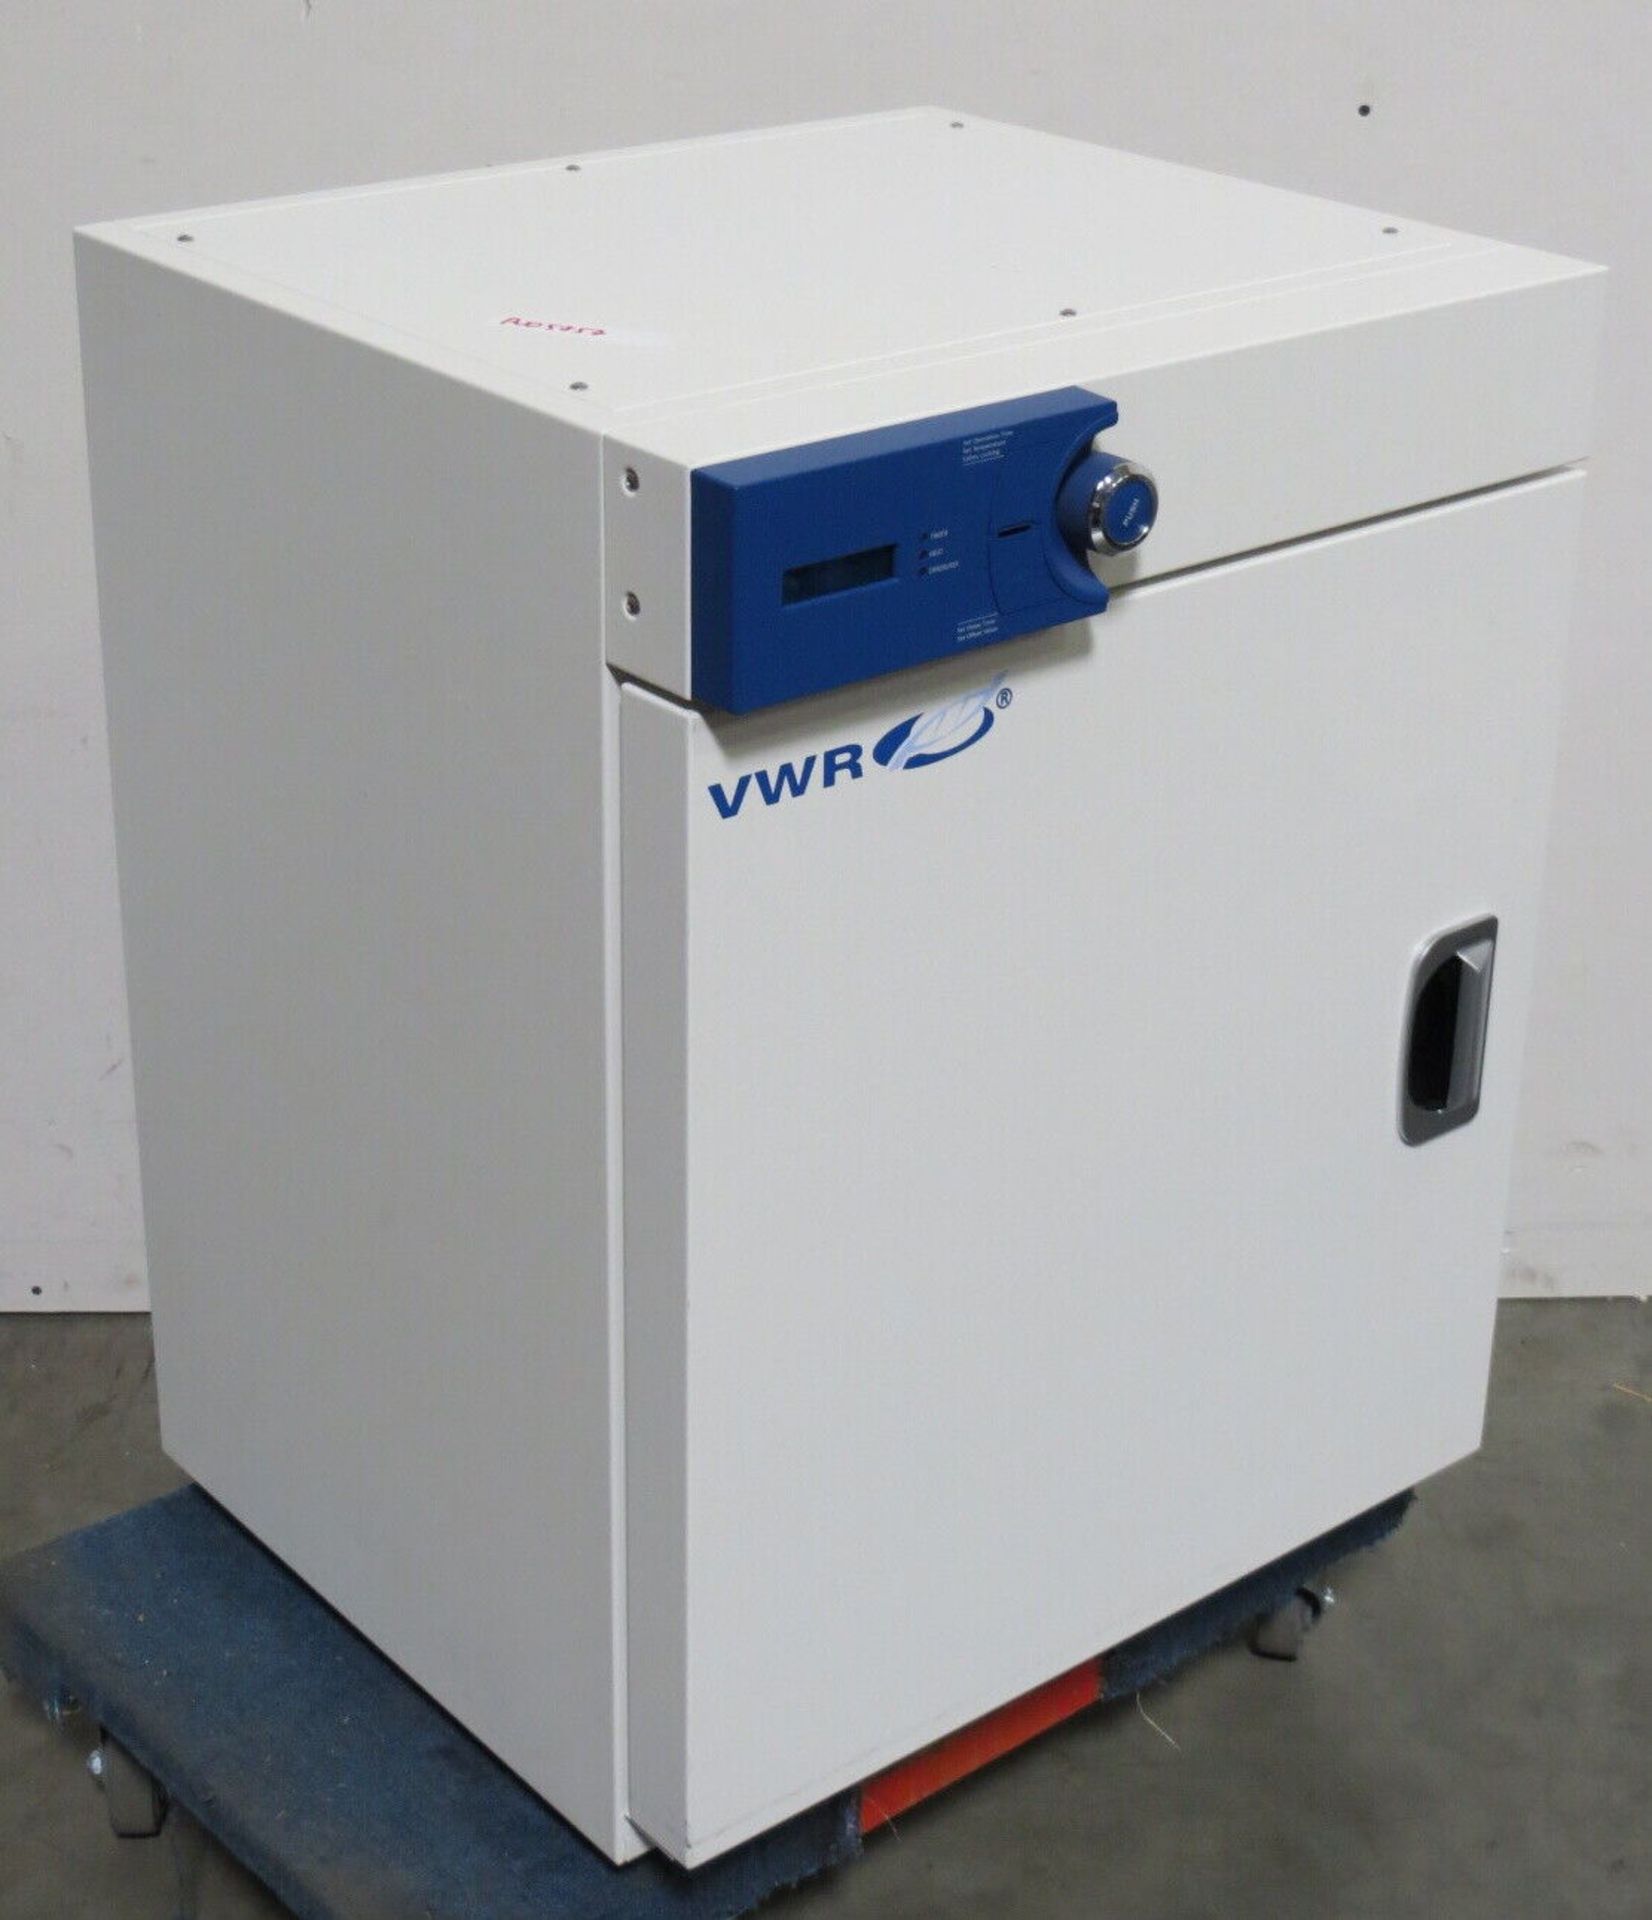 VWR 414005-132 Gravity Convection General Incubator - Image 5 of 9